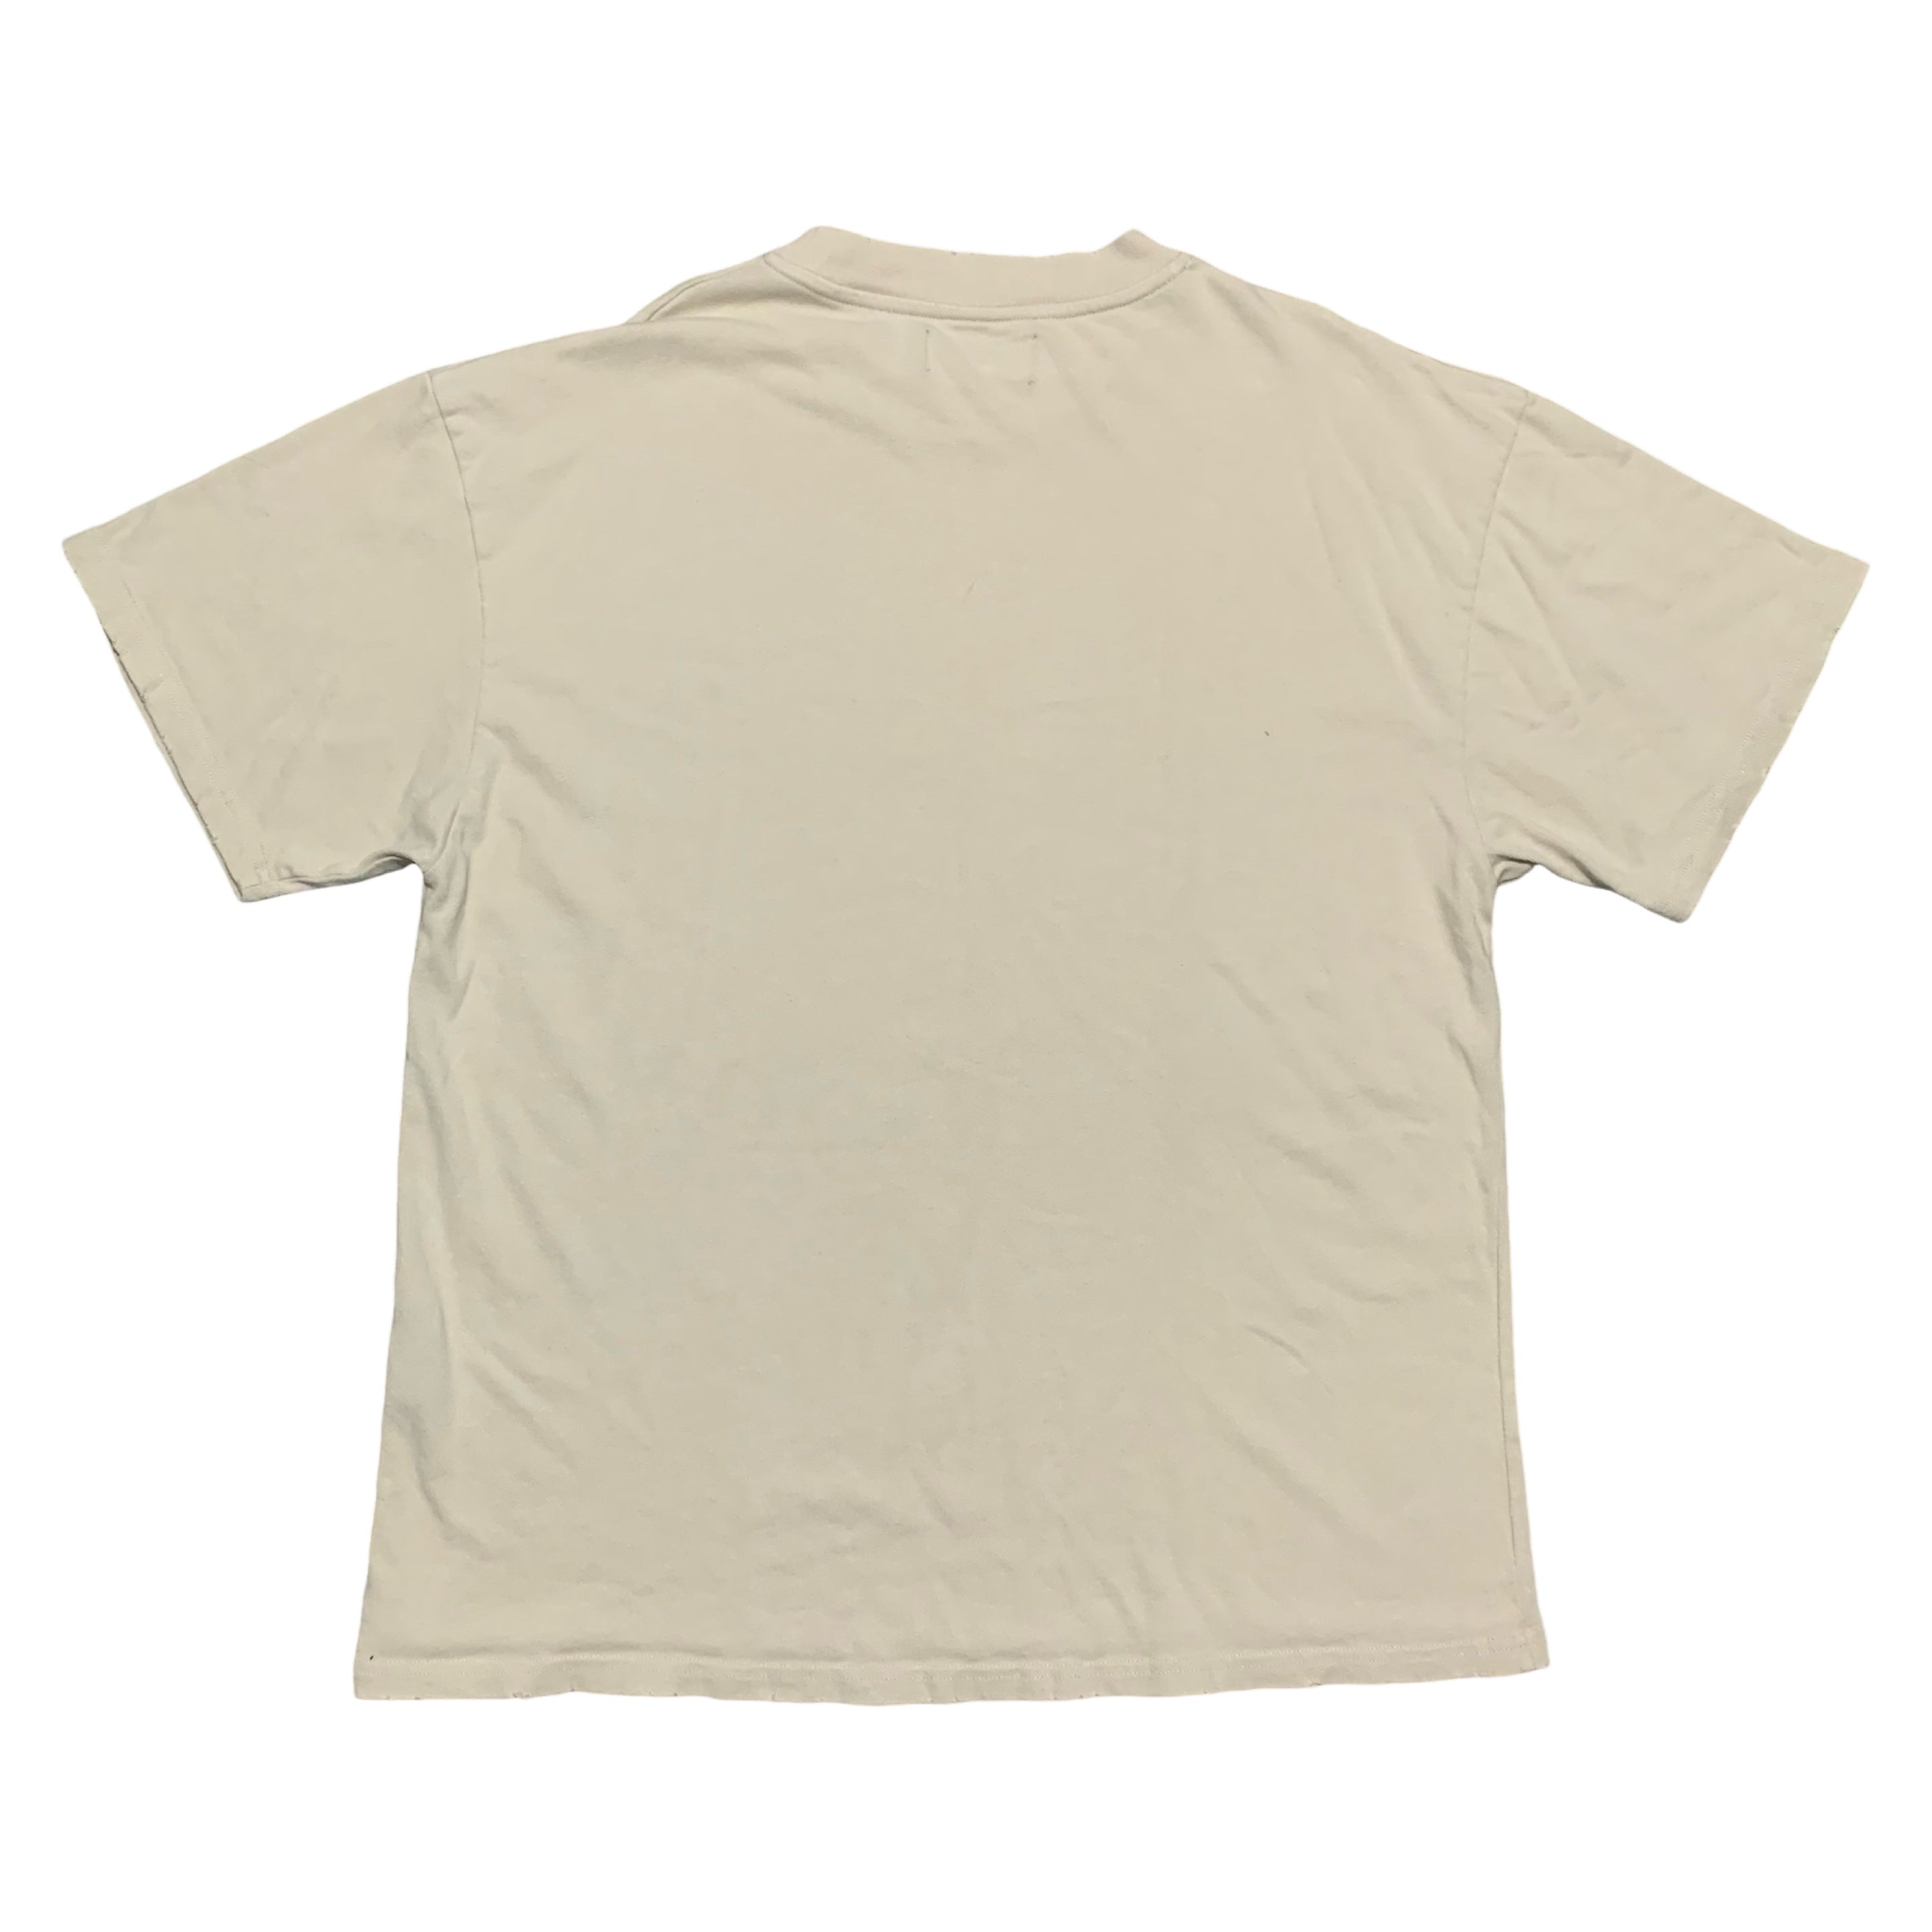 Represent Large Feel The Heat Vintage White Tee